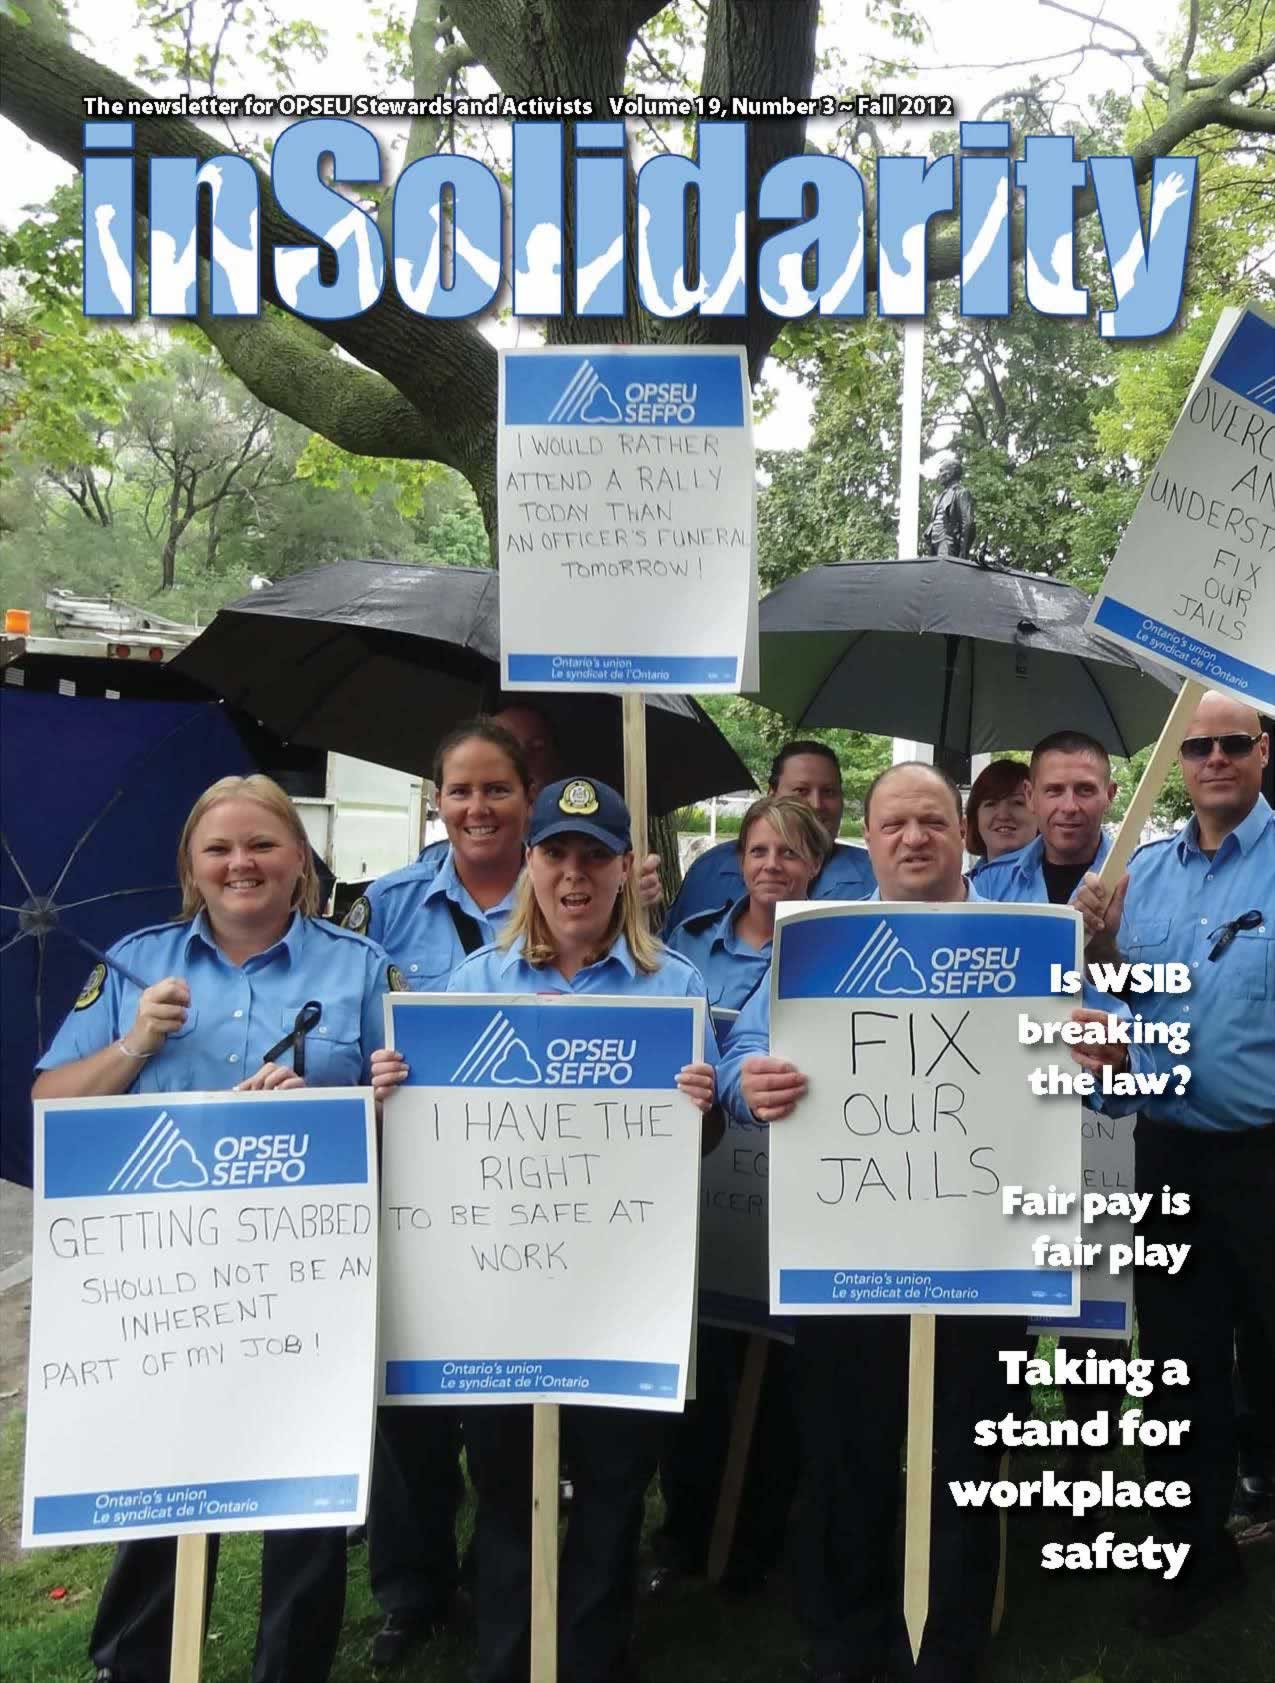 In Solidarity, Fall 2012 cover. Correctional officers holding up signs that say: Fix our jails